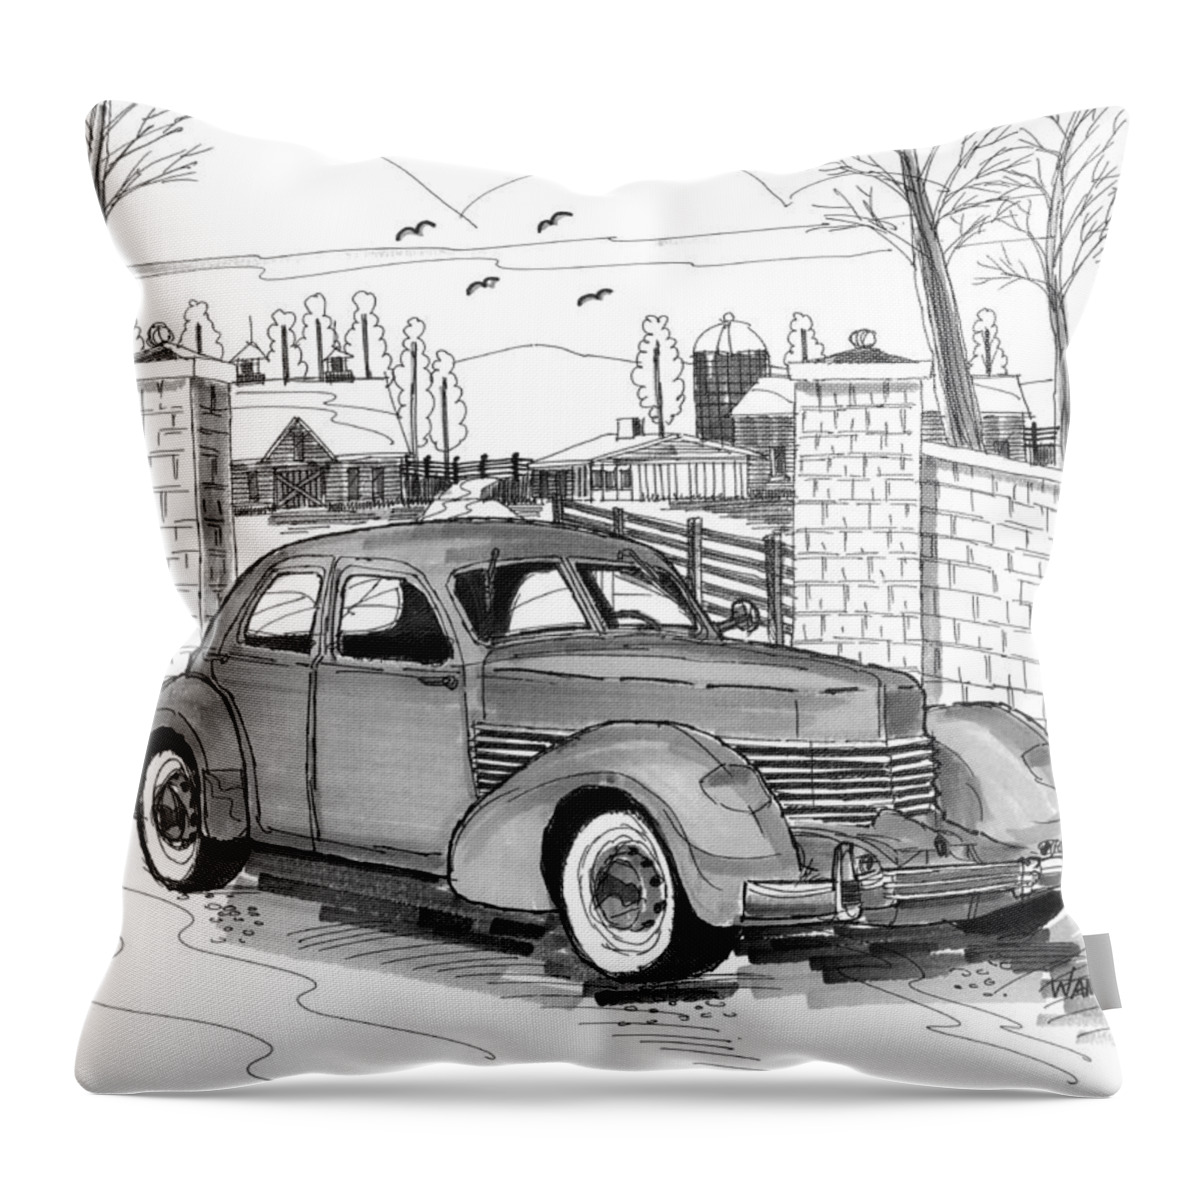 1937 Cord 812 Throw Pillow featuring the drawing 1937 Cord 812 by Richard Wambach